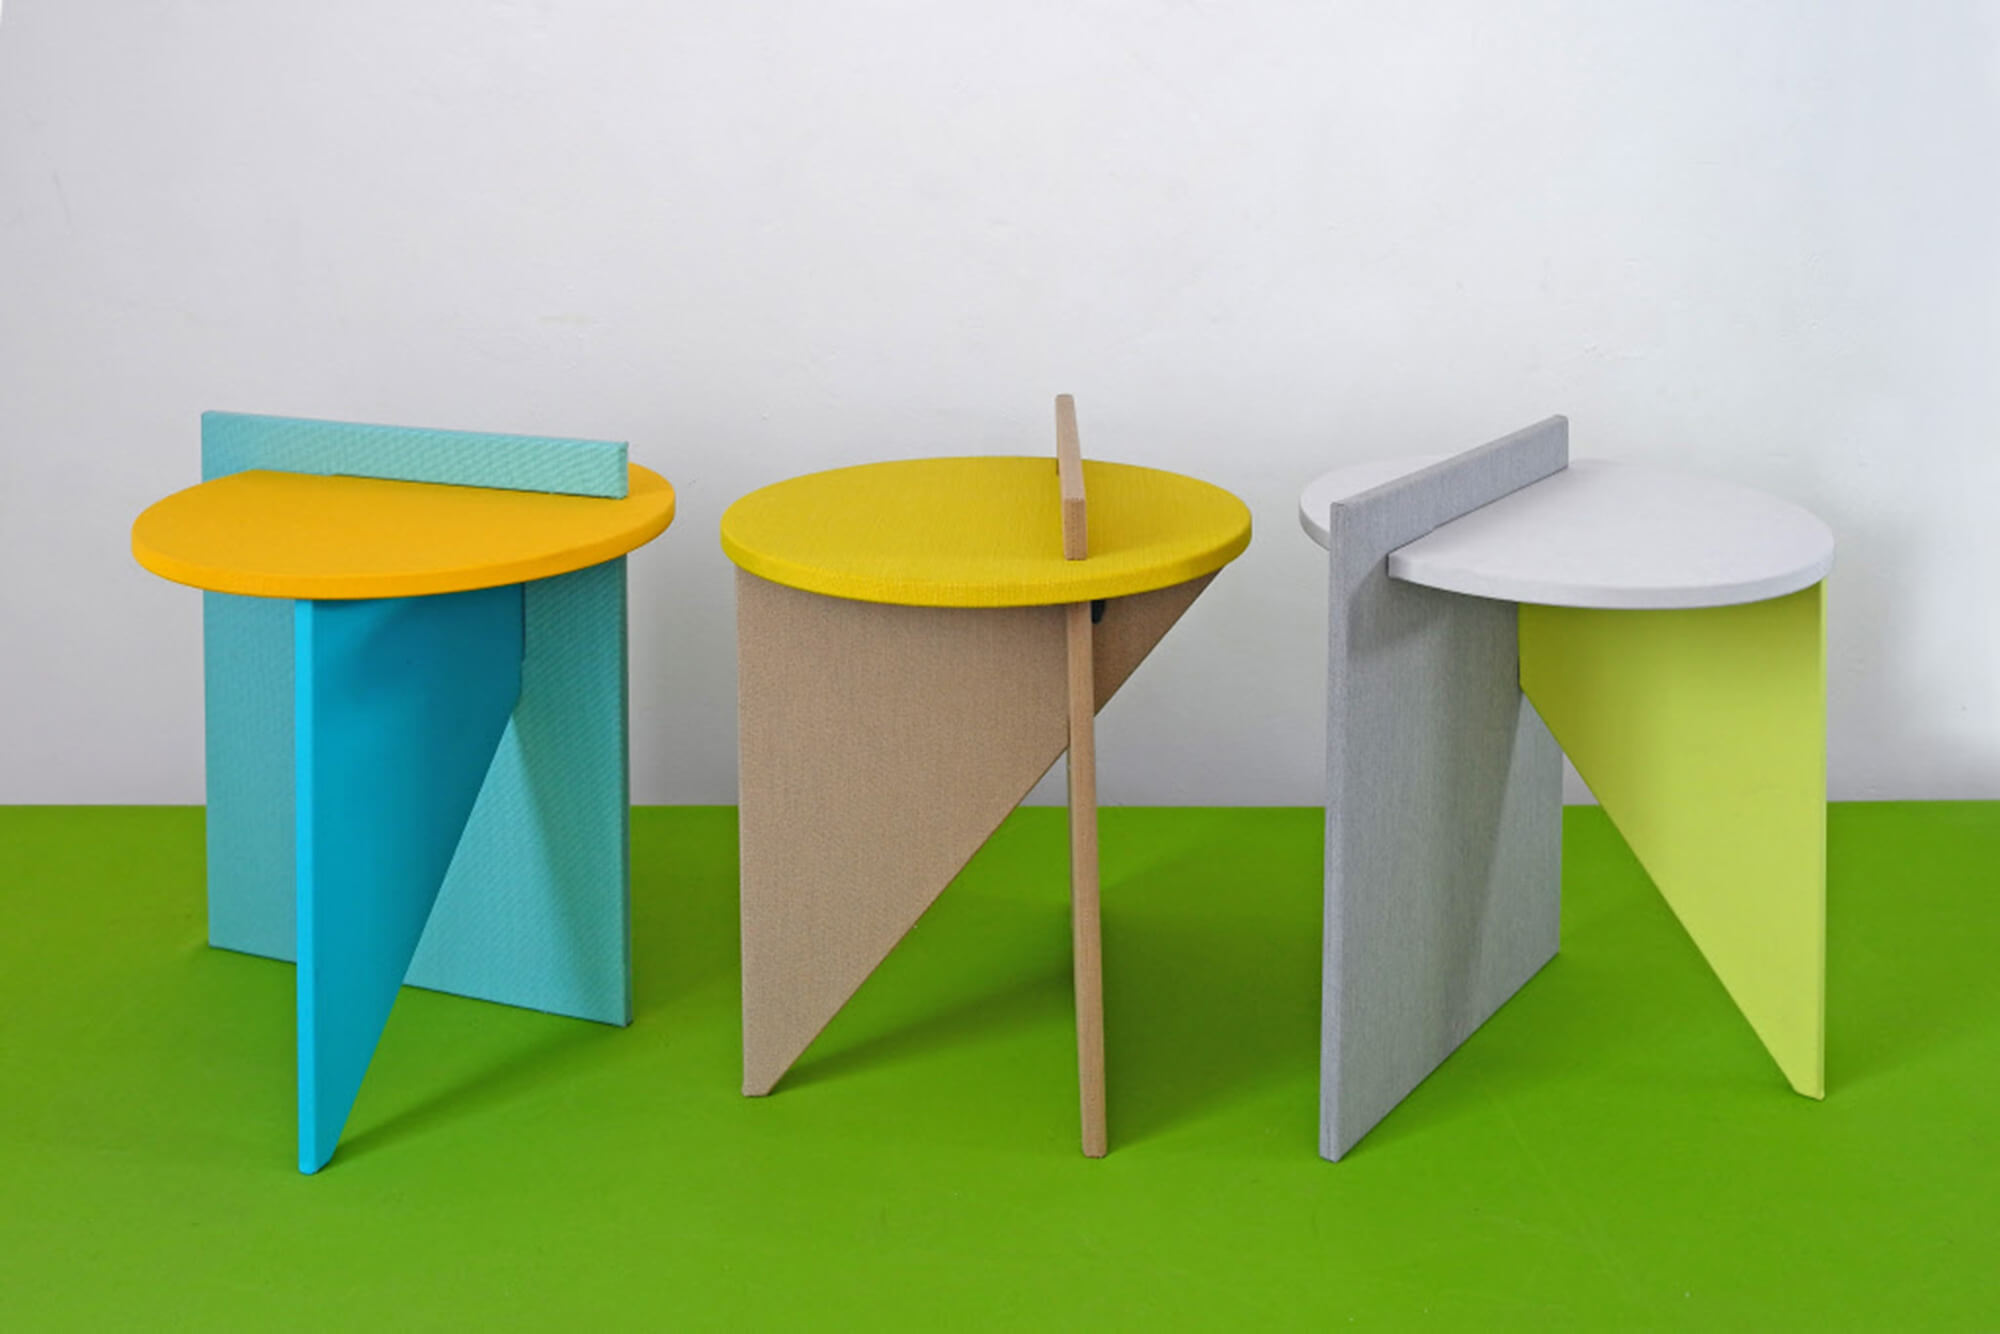 Side Tables by Atelier Lavit based on boat clamp design on display in the Rosana Orlandi gallery